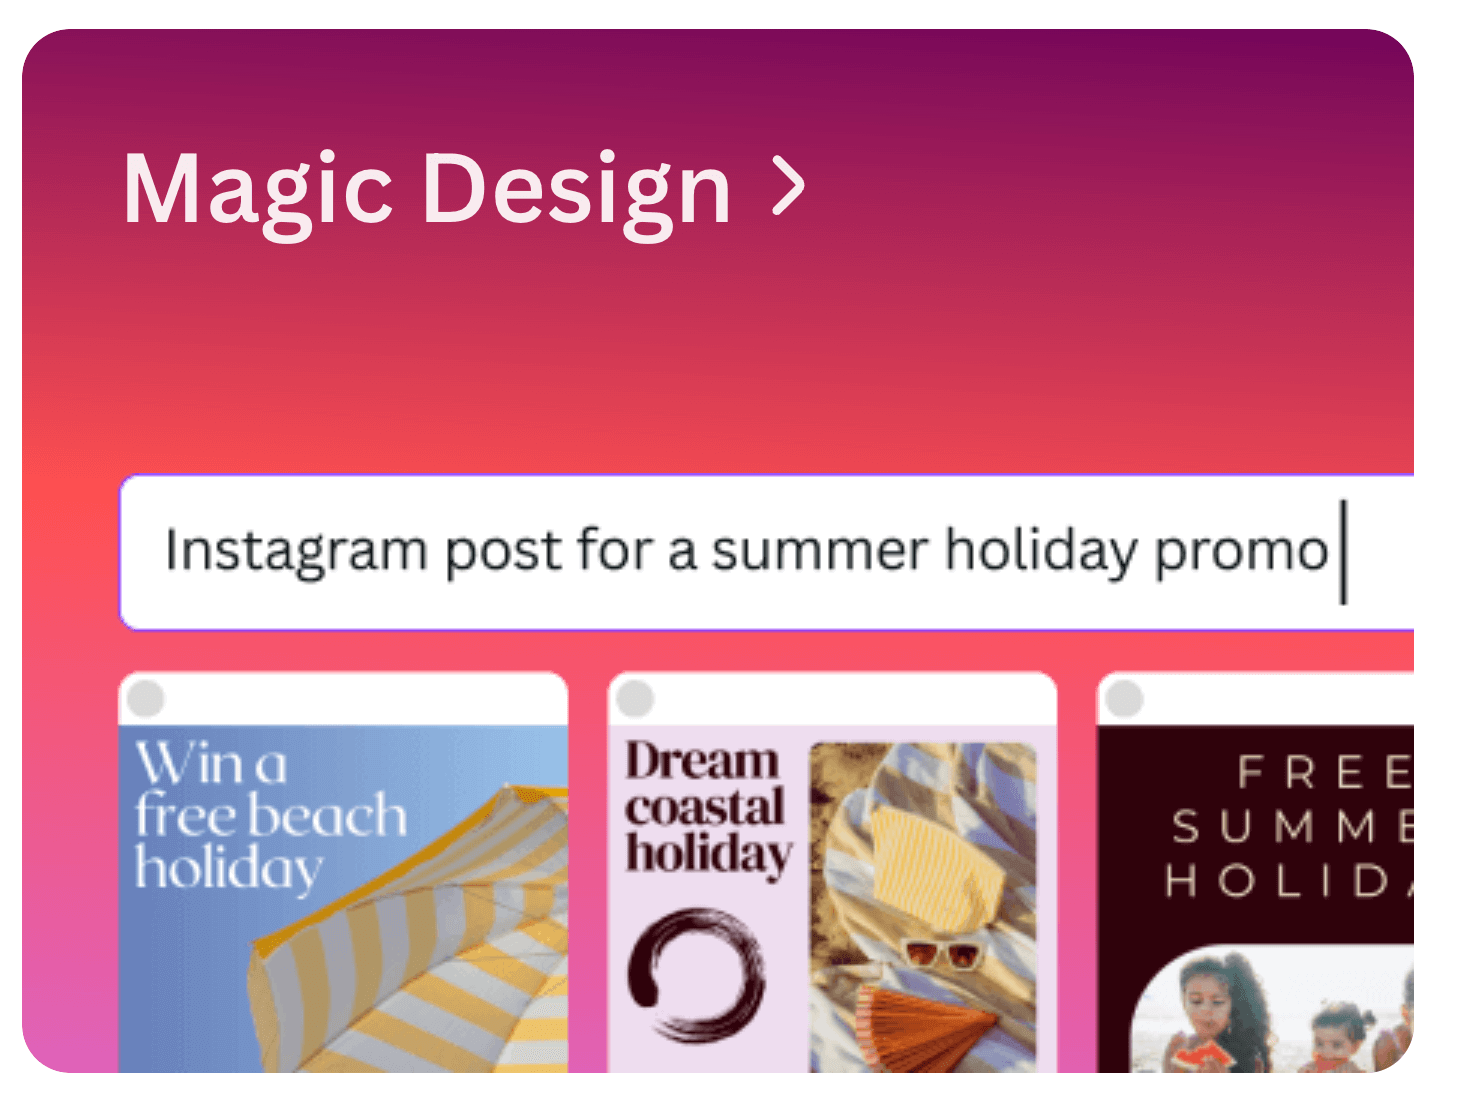 Canva Magic Studio combines the power of AI with its easy-to-use design interface to bring the best suite of design tools for bloggers EVER!